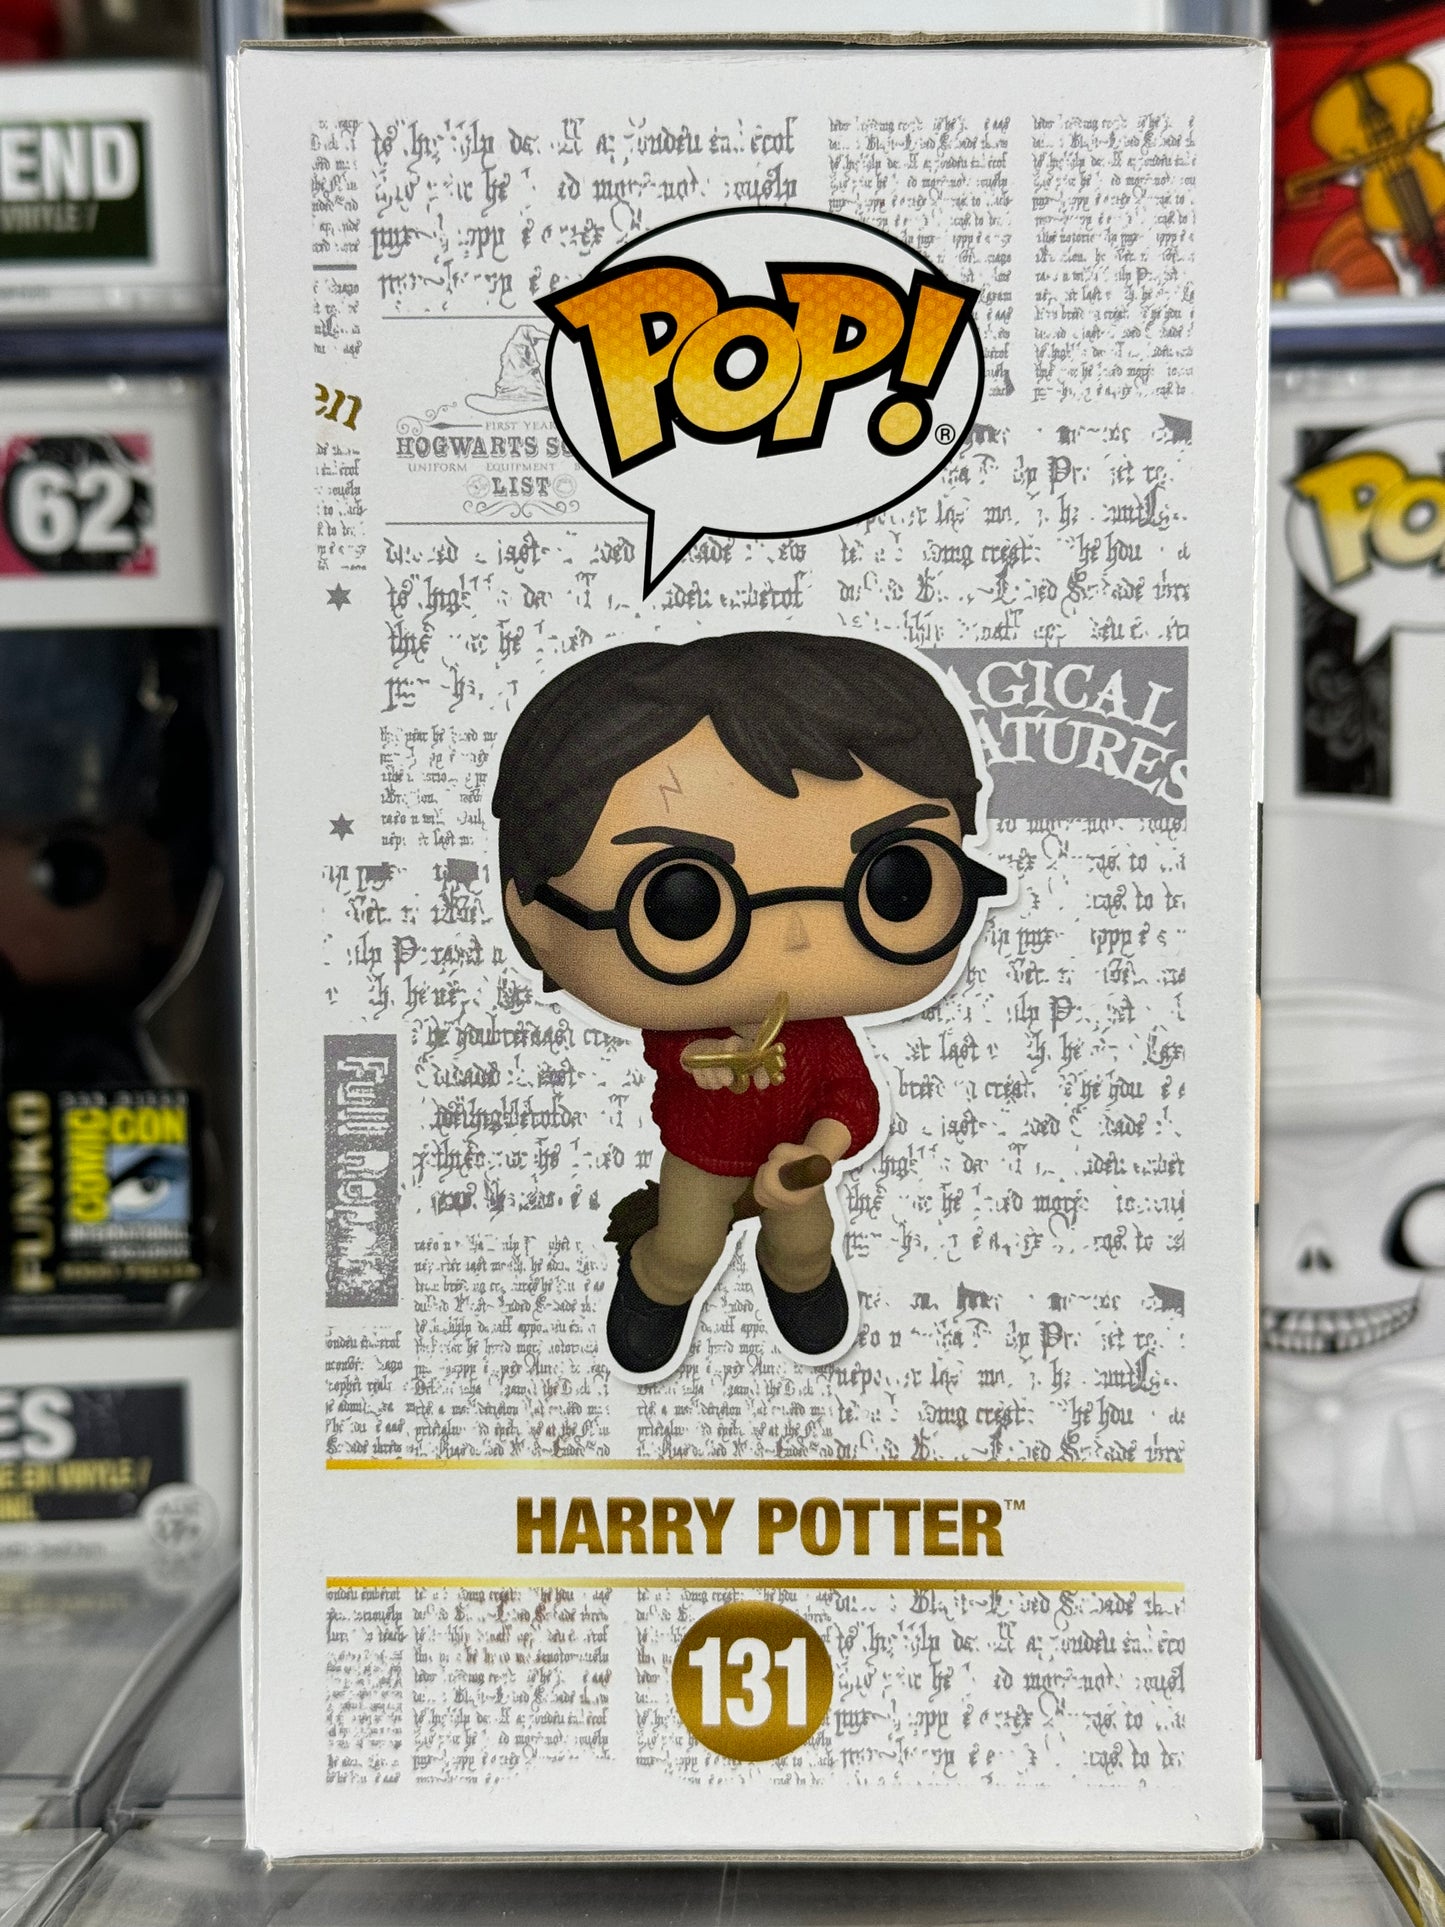 Harry Potter - Harry Potter Flying (Key In Hand) (131) Vaulted 2021 Summer Convention